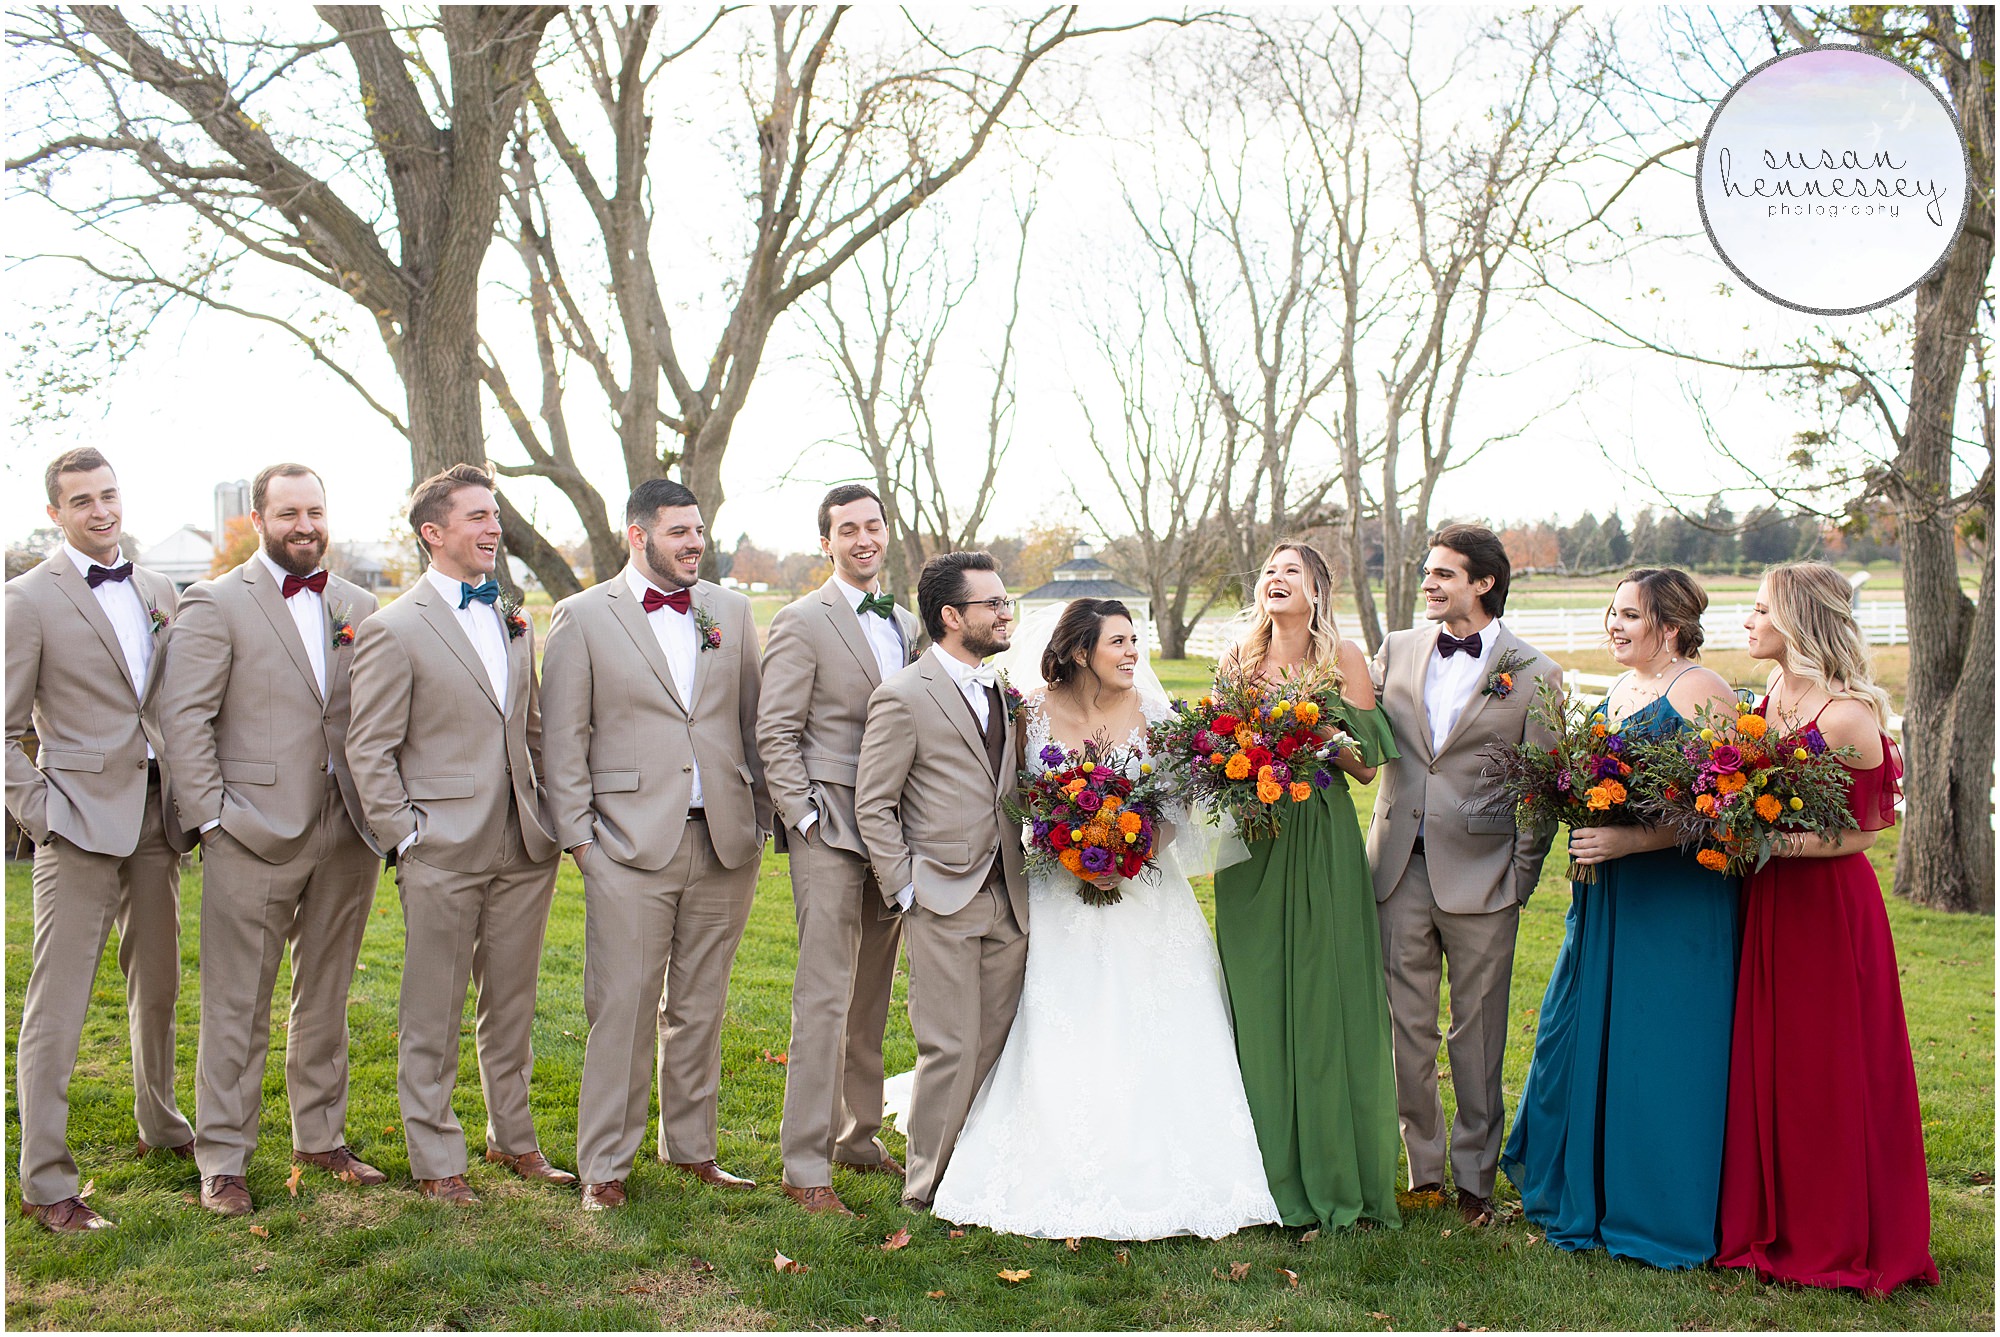 Bridal party with fall colors at Barn at Silverstone wedding